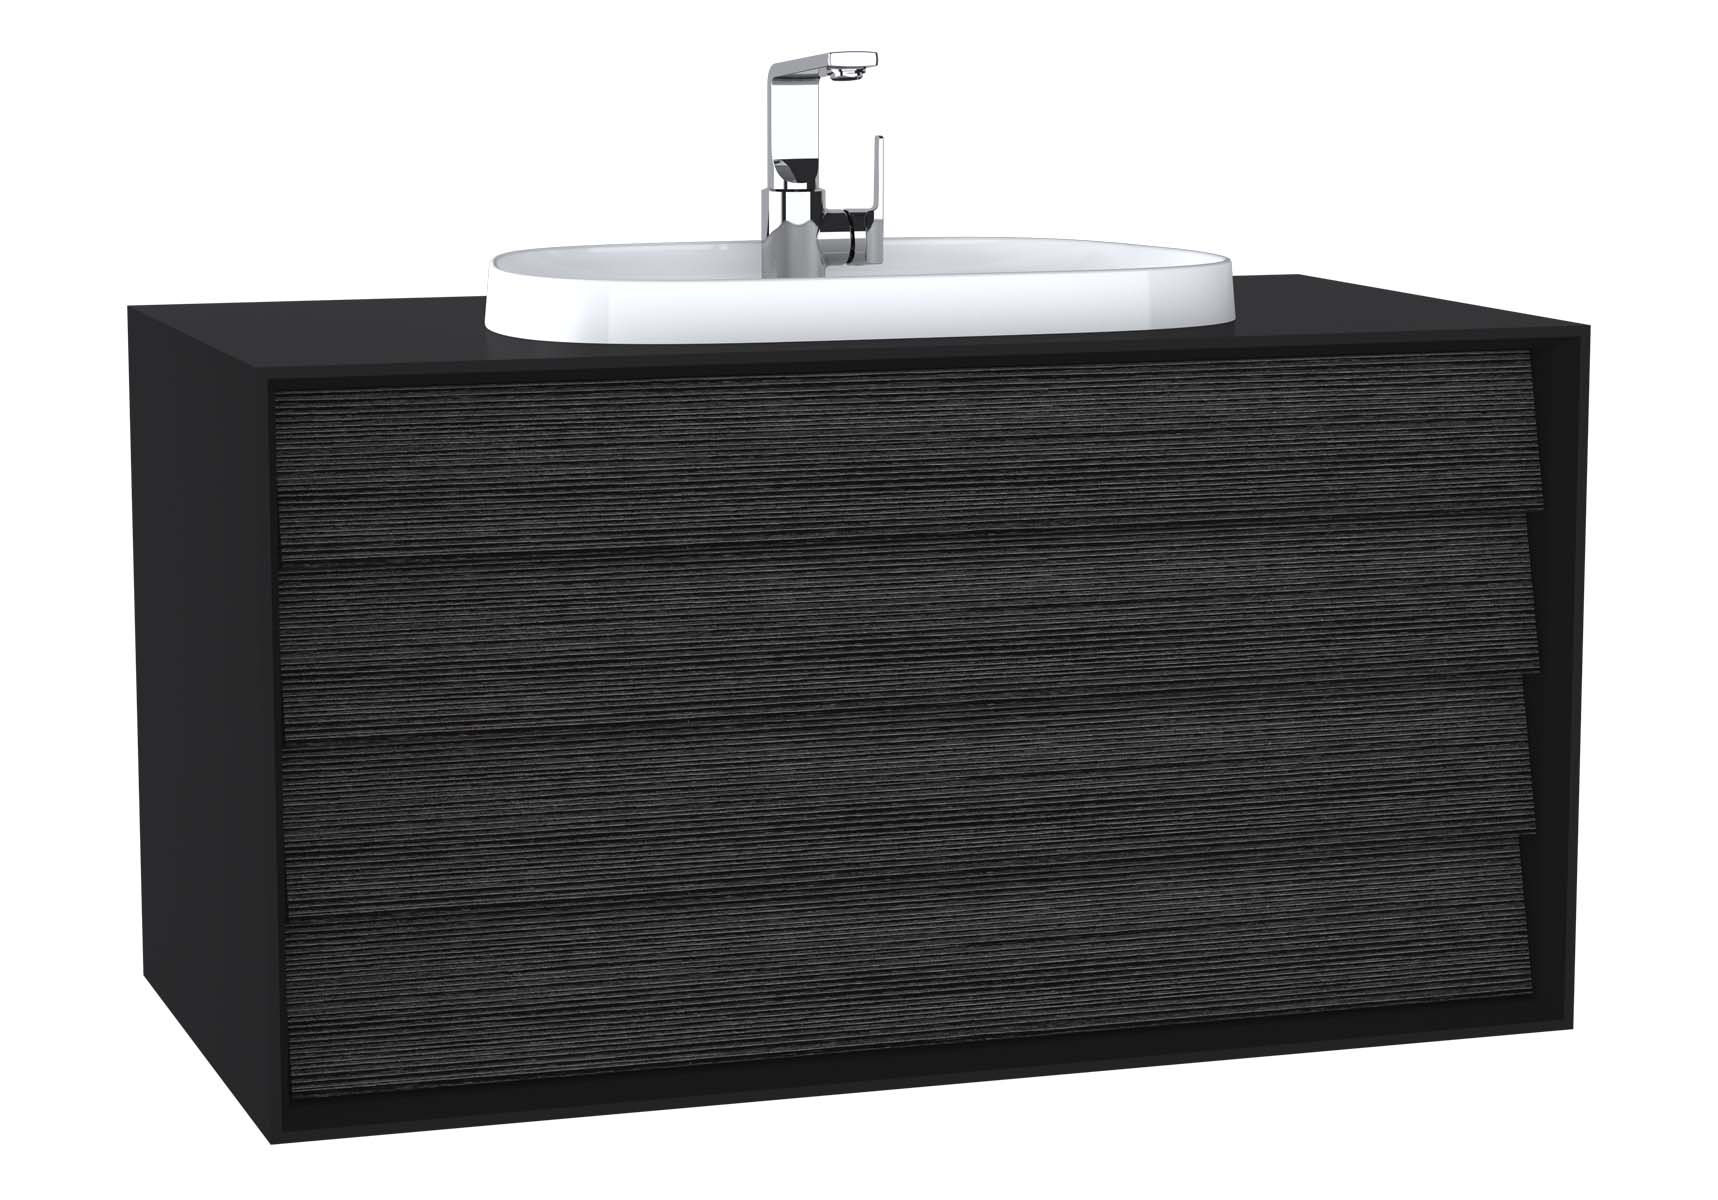 Frame Washbasin Unit, 100 cm, with 2 drawers, with countertop TV-shape washbasin, with faucet hole, Matte Black